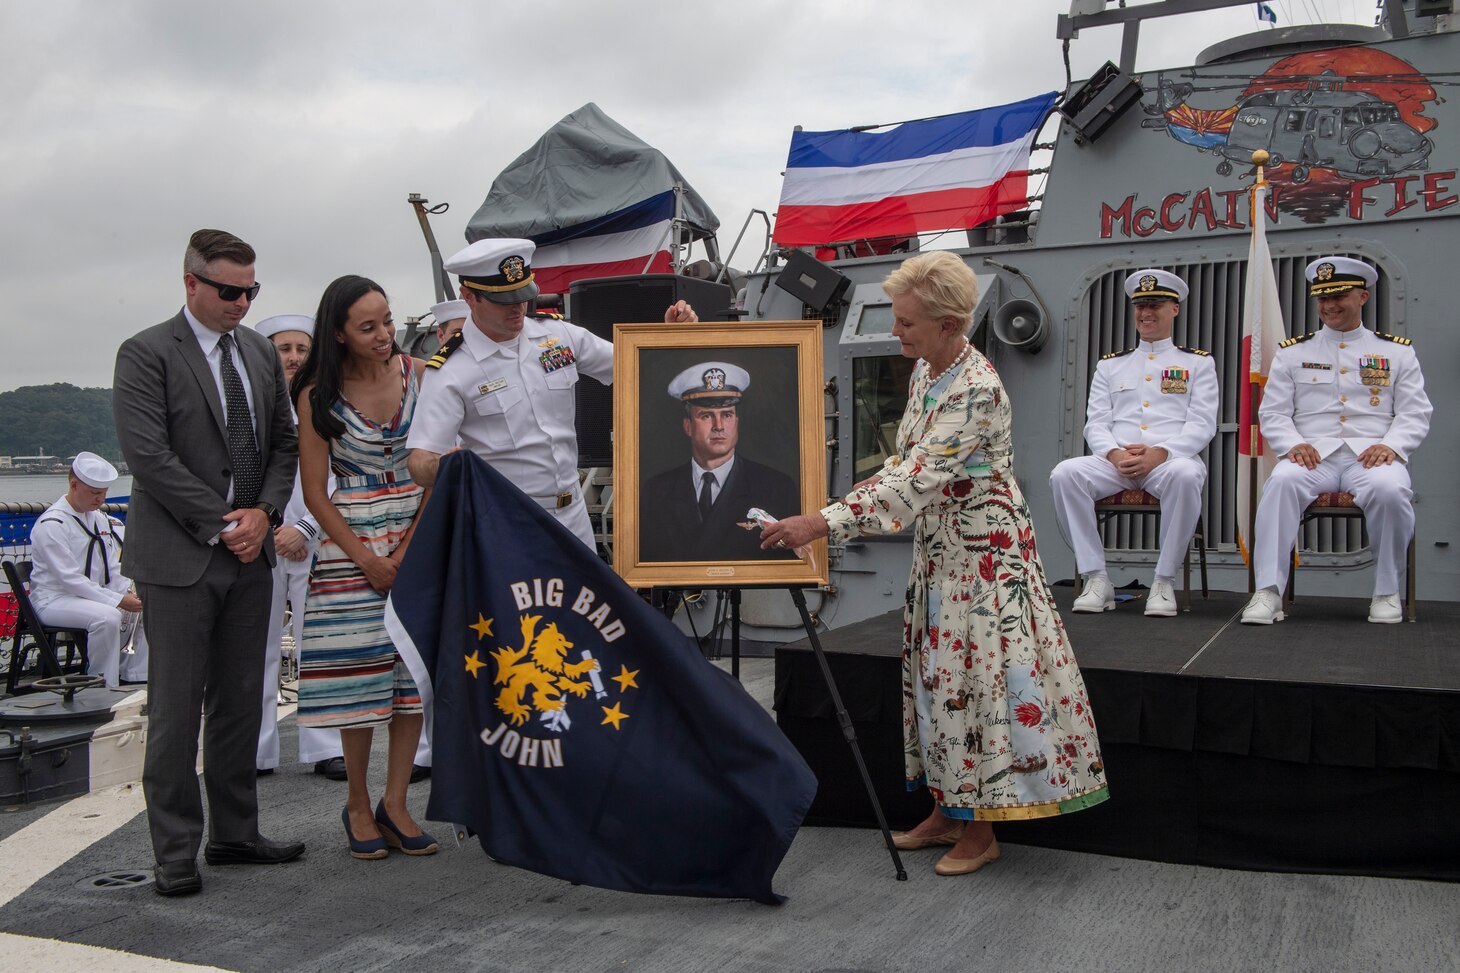 Cindy McCain, the ship’s sponsor of USS John S. McCain (DDG 56) and wife of late Sen. John S. McCain III, is presented with a painting of her husband during the 25th anniversary of the ship’s commissioning, July 2, 2019 at Commander, Fleet Activities Yokosuka, Japan. McCain was commissioned on July 2, 1994 in Bath, Maine and was originally named in honor of Admirals John S. McCain Sr. and Jr. In a rededication ceremony on July 12, 2018 the late Sen. John S. McCain III was officially added to the namesake.